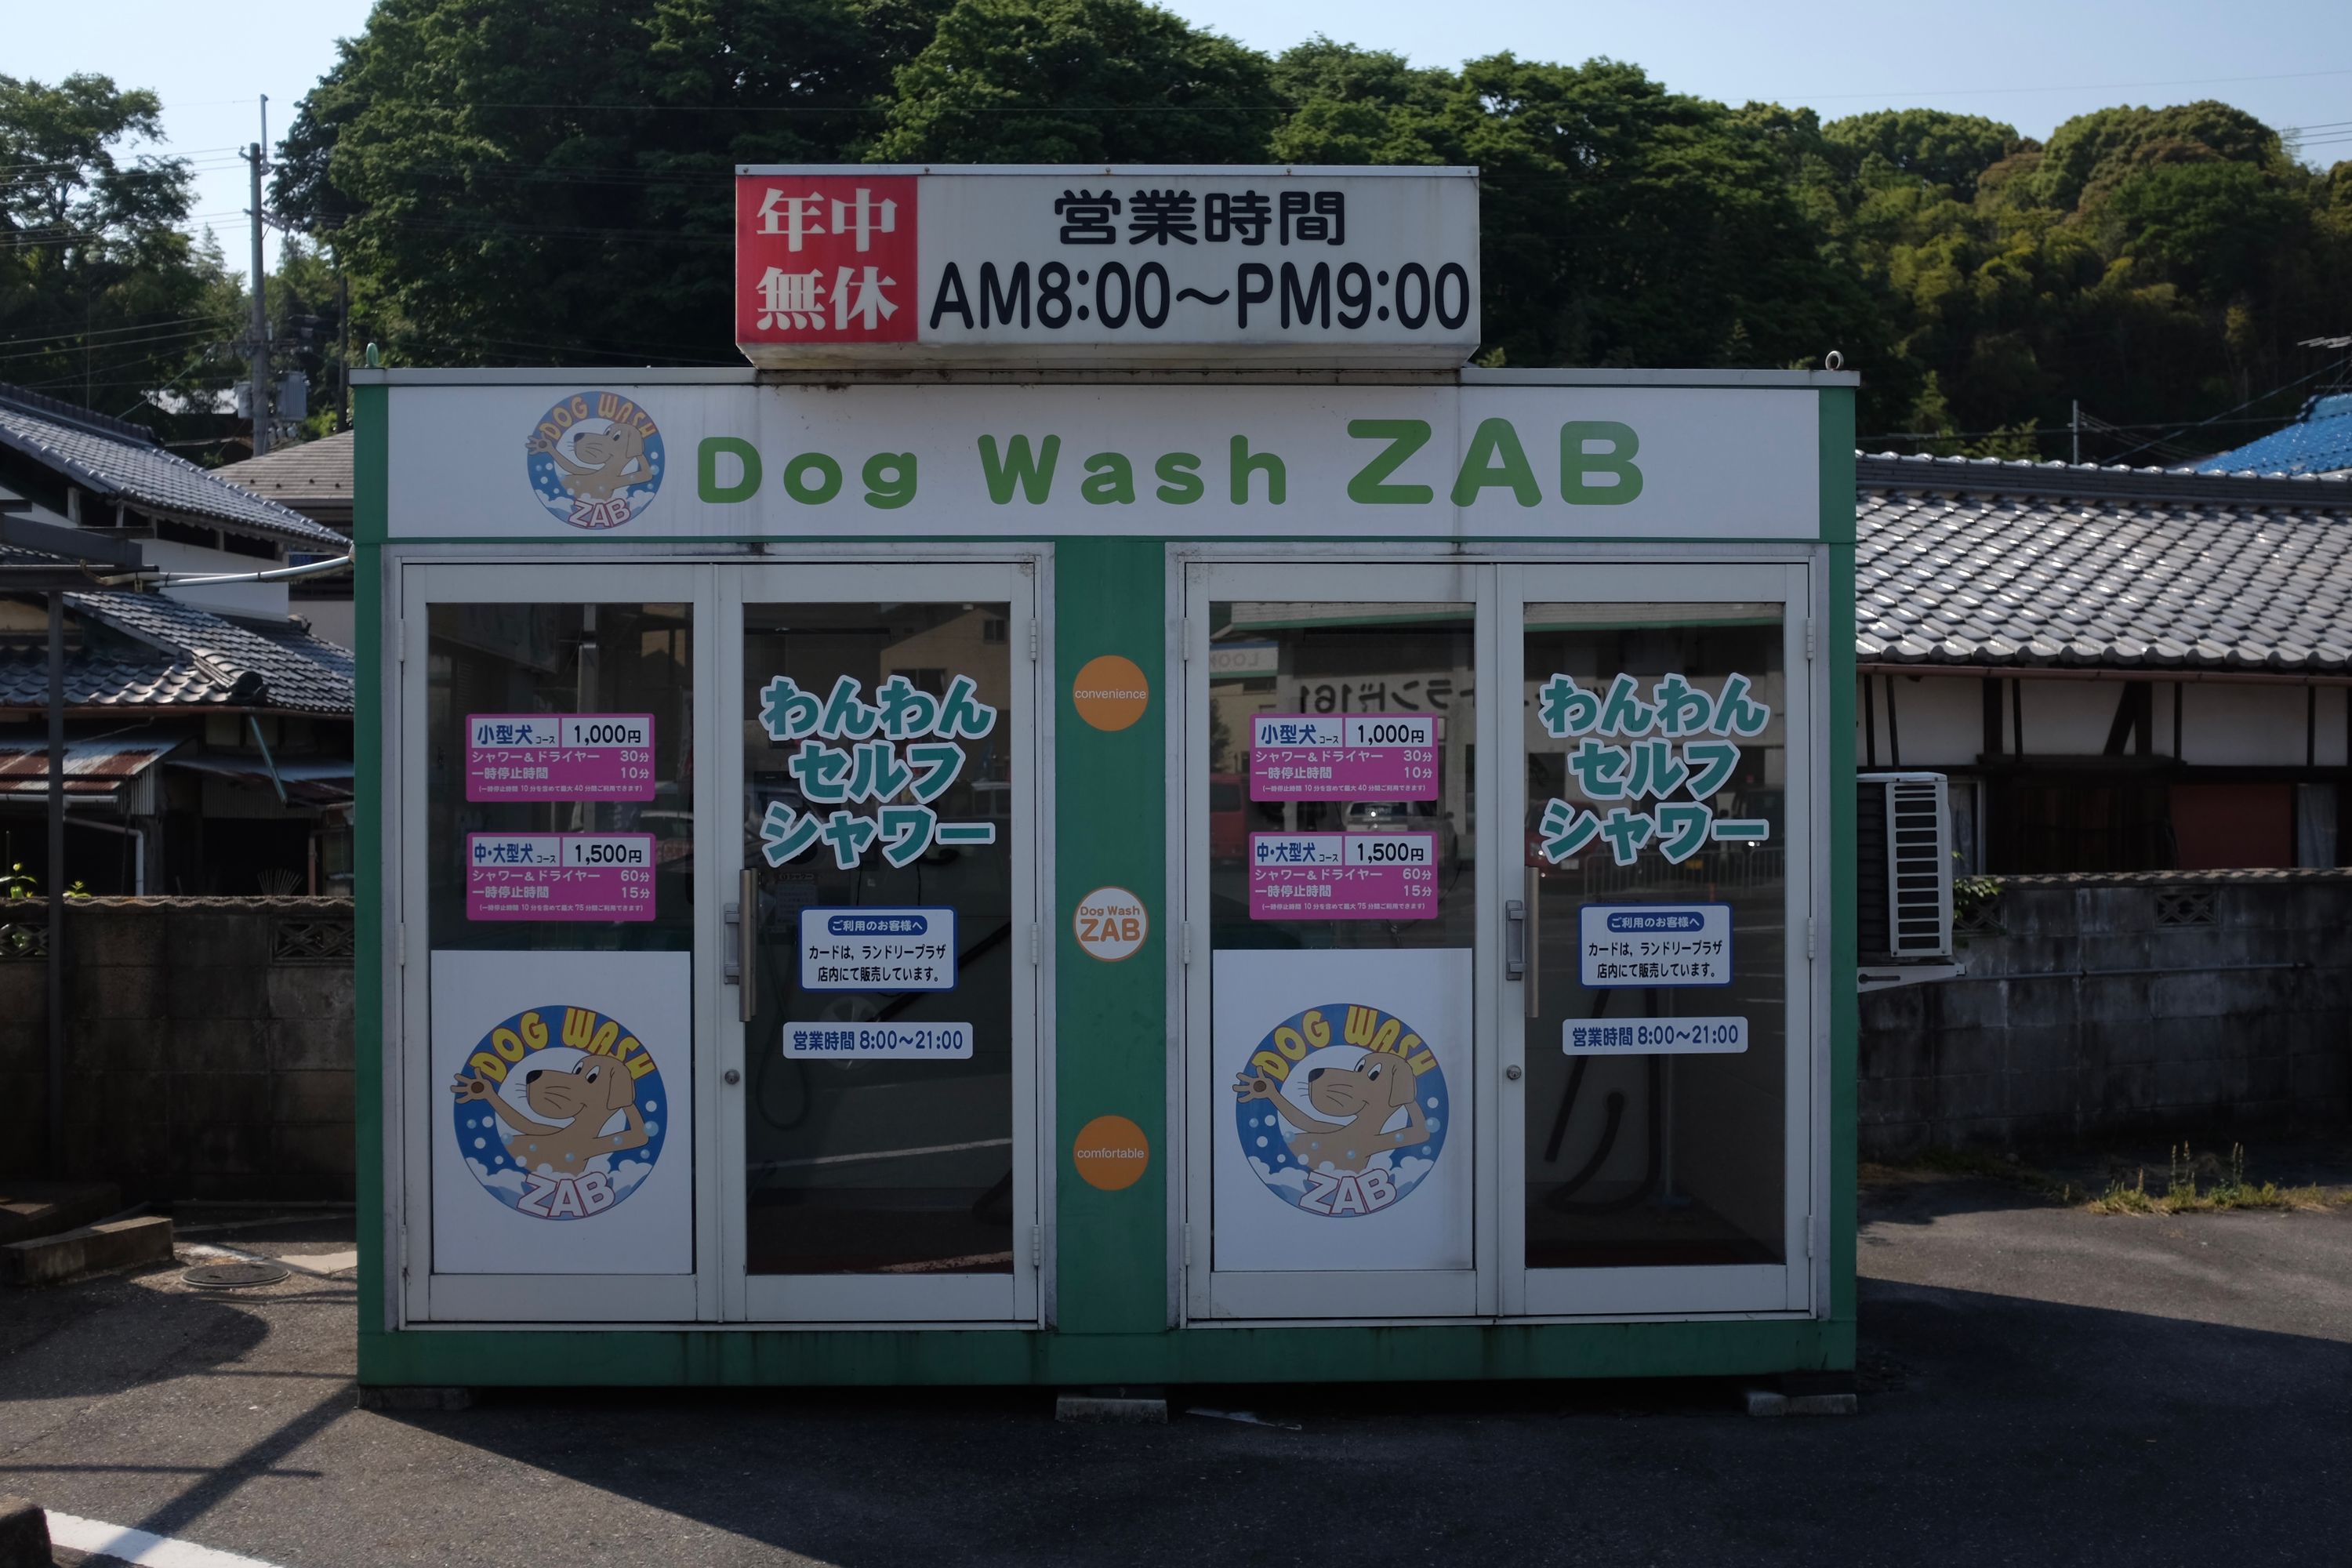 A building with a sign saying “Dog Wash ZAB”.